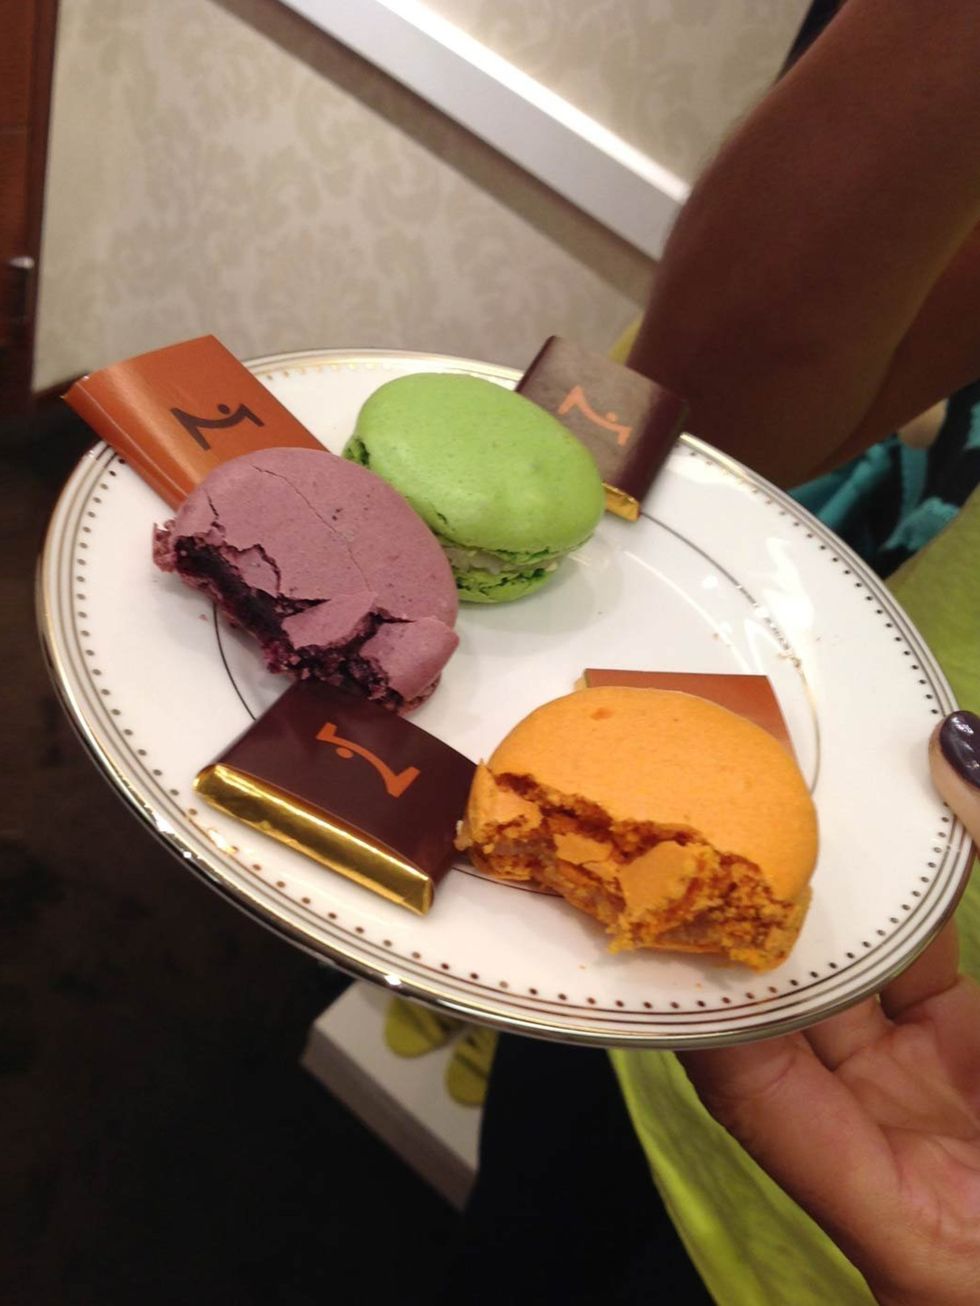 <p>You can tell we enjoyed the Harrods macaroons!</p>